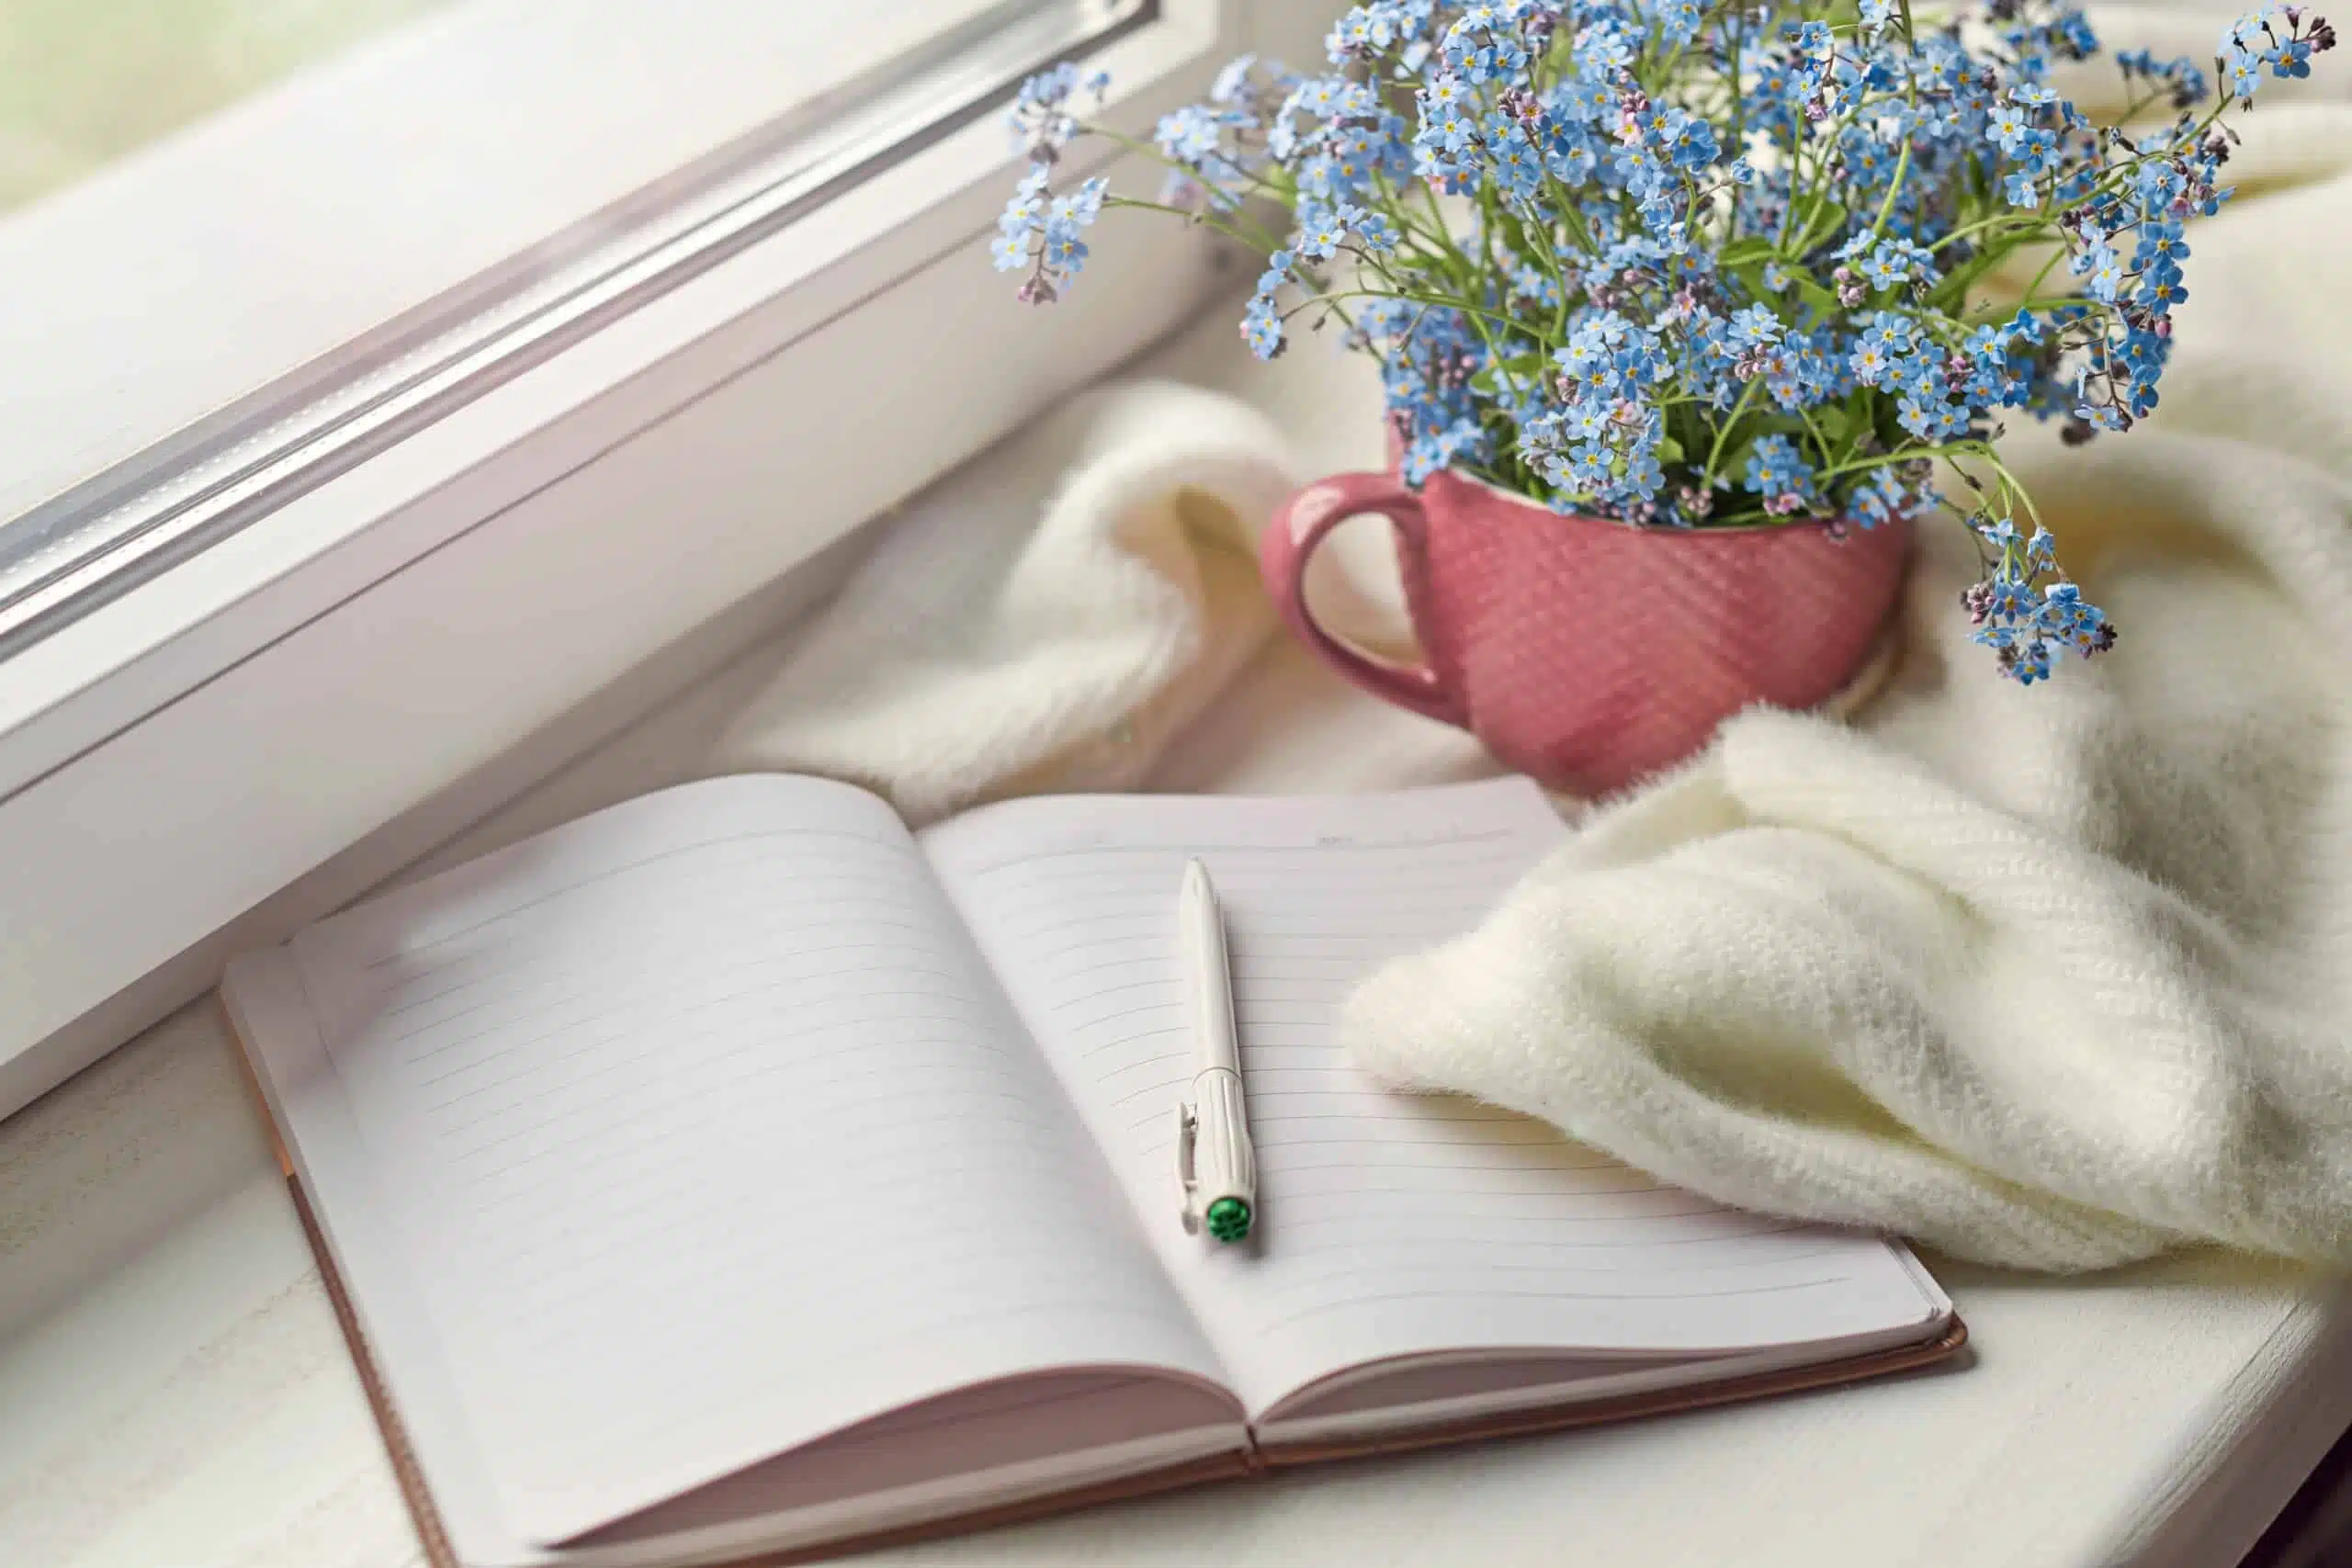 White warm plaid blanket, notebook and pen, flowers in cup by the window.